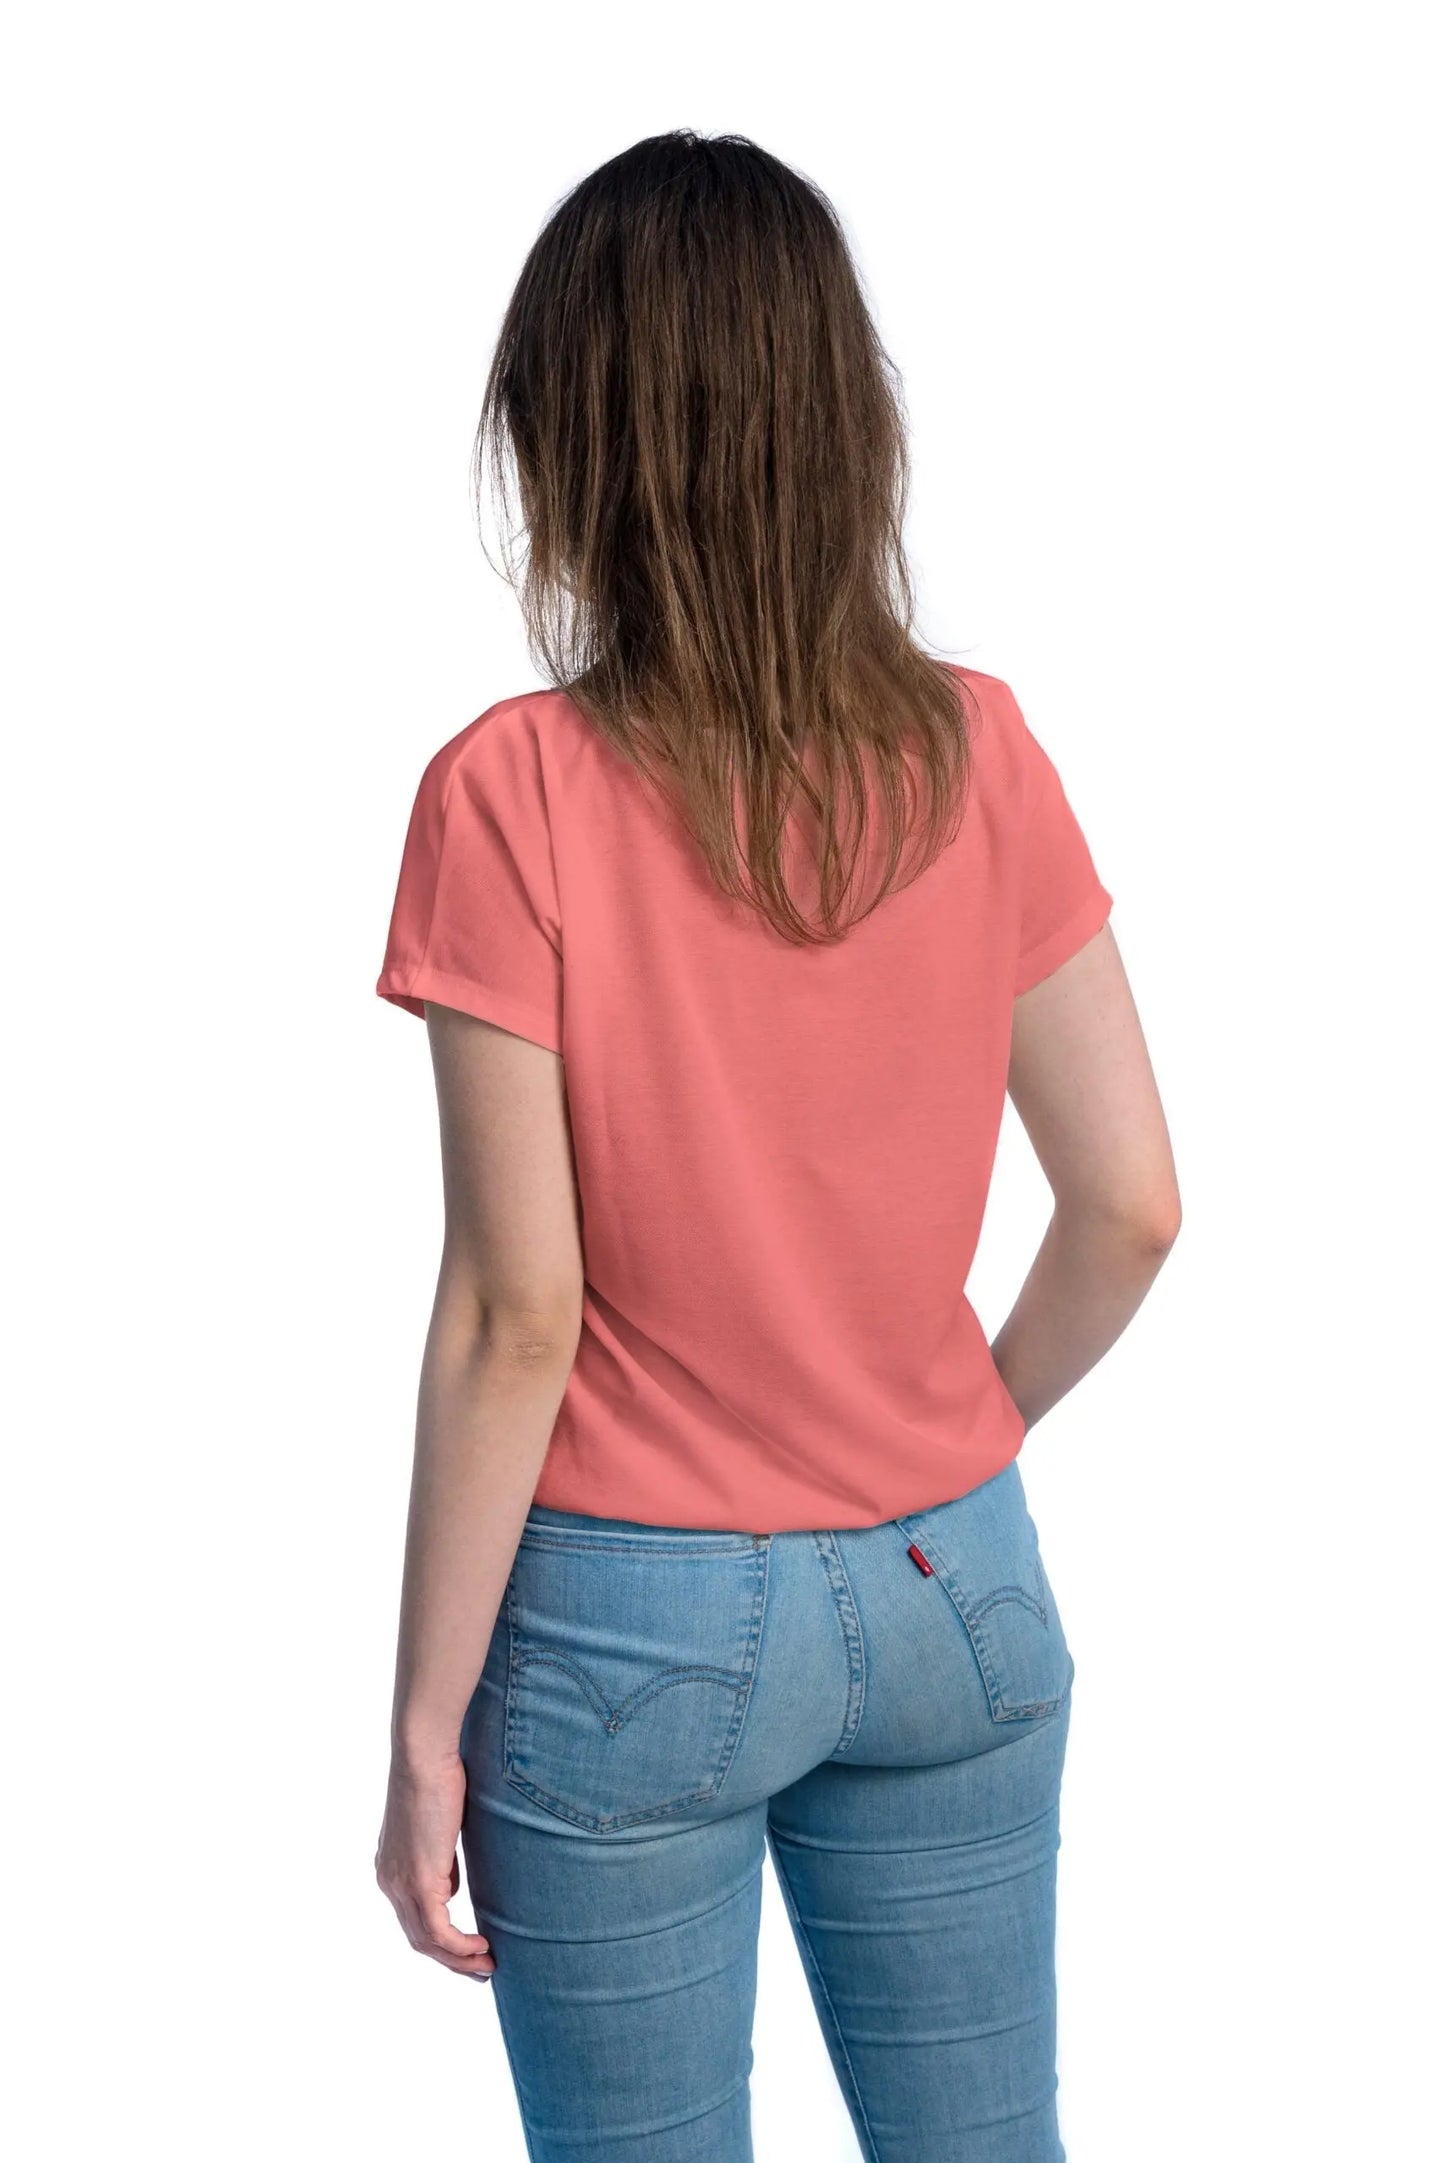 A woman in a coral Tan-Through T-Shirt, elastic band at the bottom, designed for outdoor activities, allowing healthy tanning with UVA rays passing through fabric. Sizes XS-XXL.